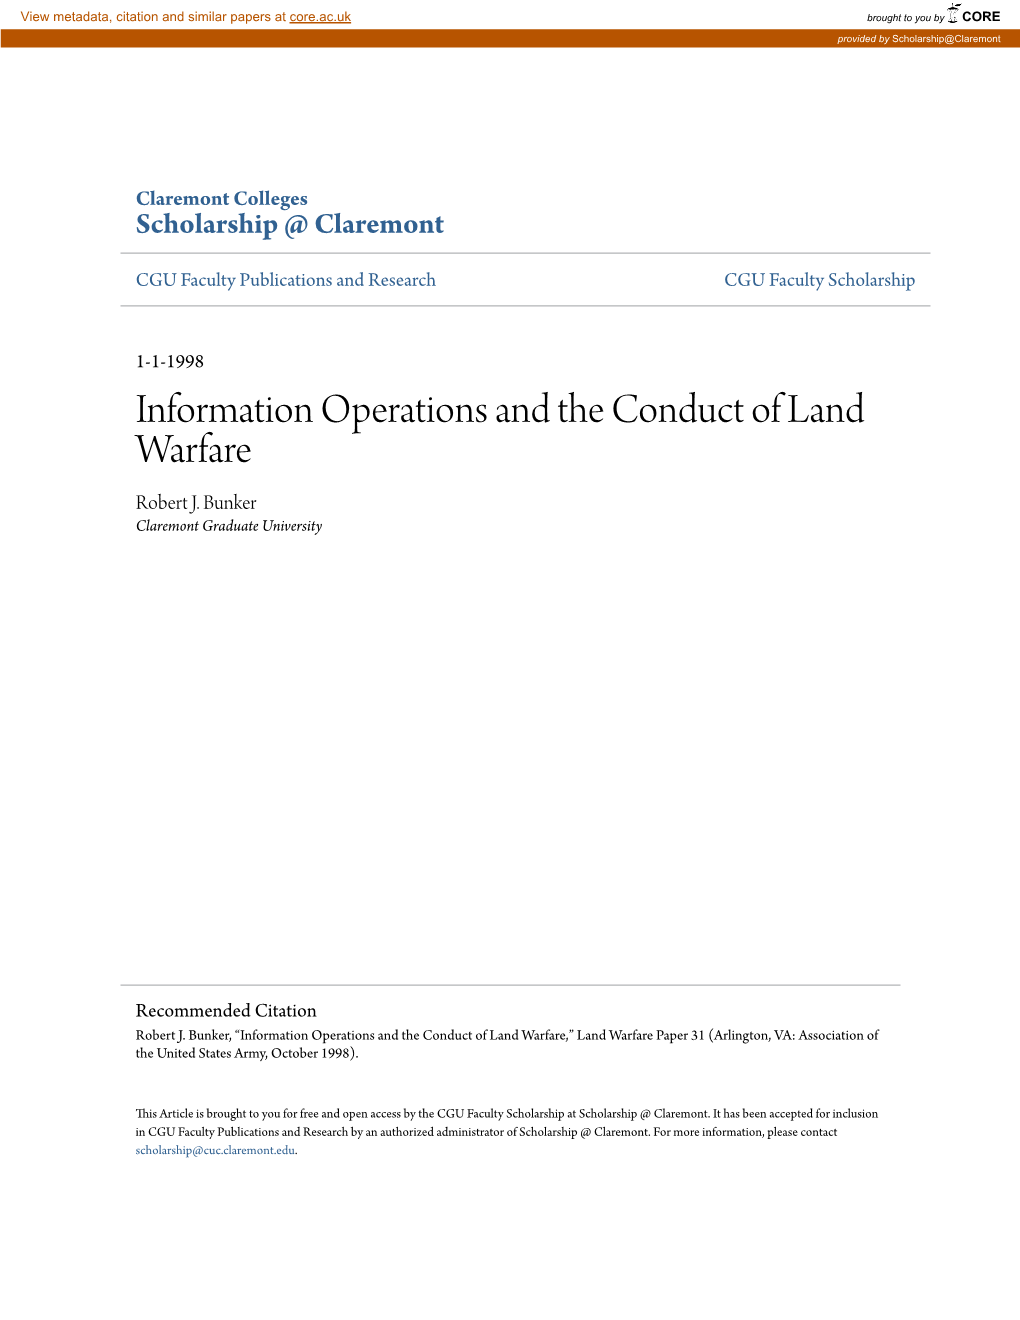 Information Operations and the Conduct of Land Warfare Robert J